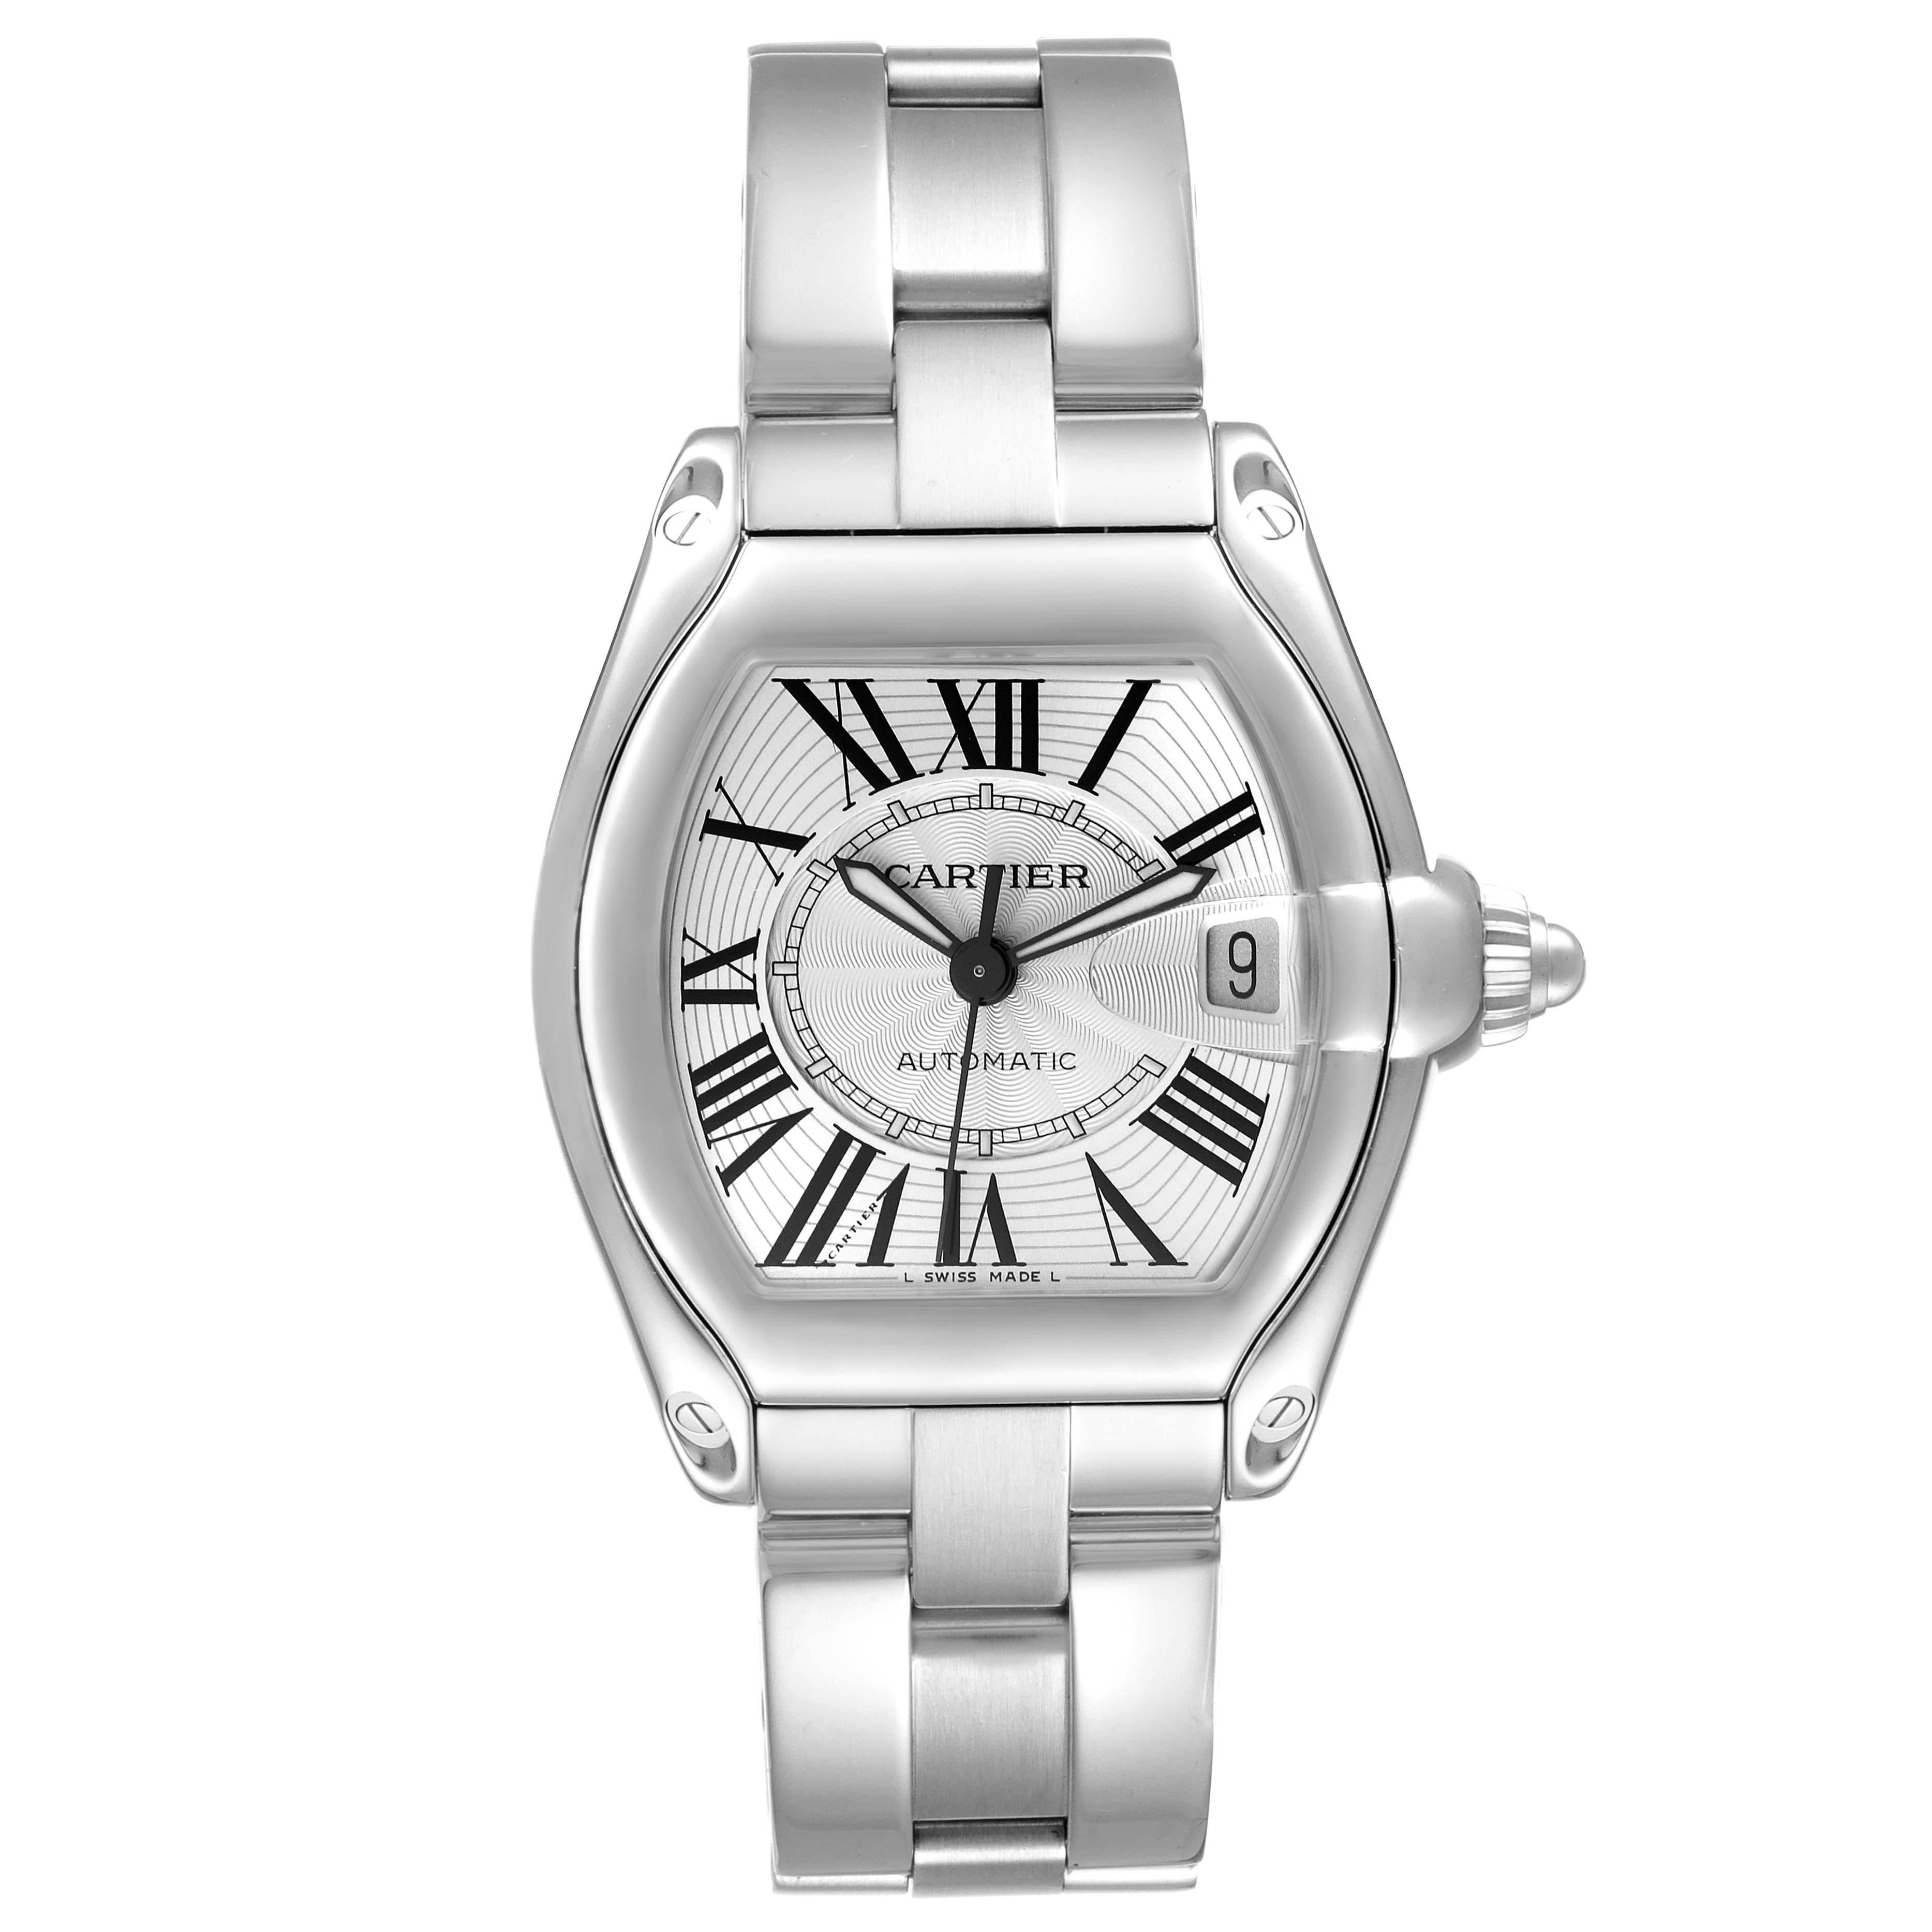 Cartier Roadster Large Silver Dial Steel Mens Watch W62025V3. Automatic self-winding movement. Stainless steel tonneau shaped case 38 x 43 mm. . Scratch resistant sapphire crystal with cyclops magnifying glass. Silver dial with black Roman numerals.